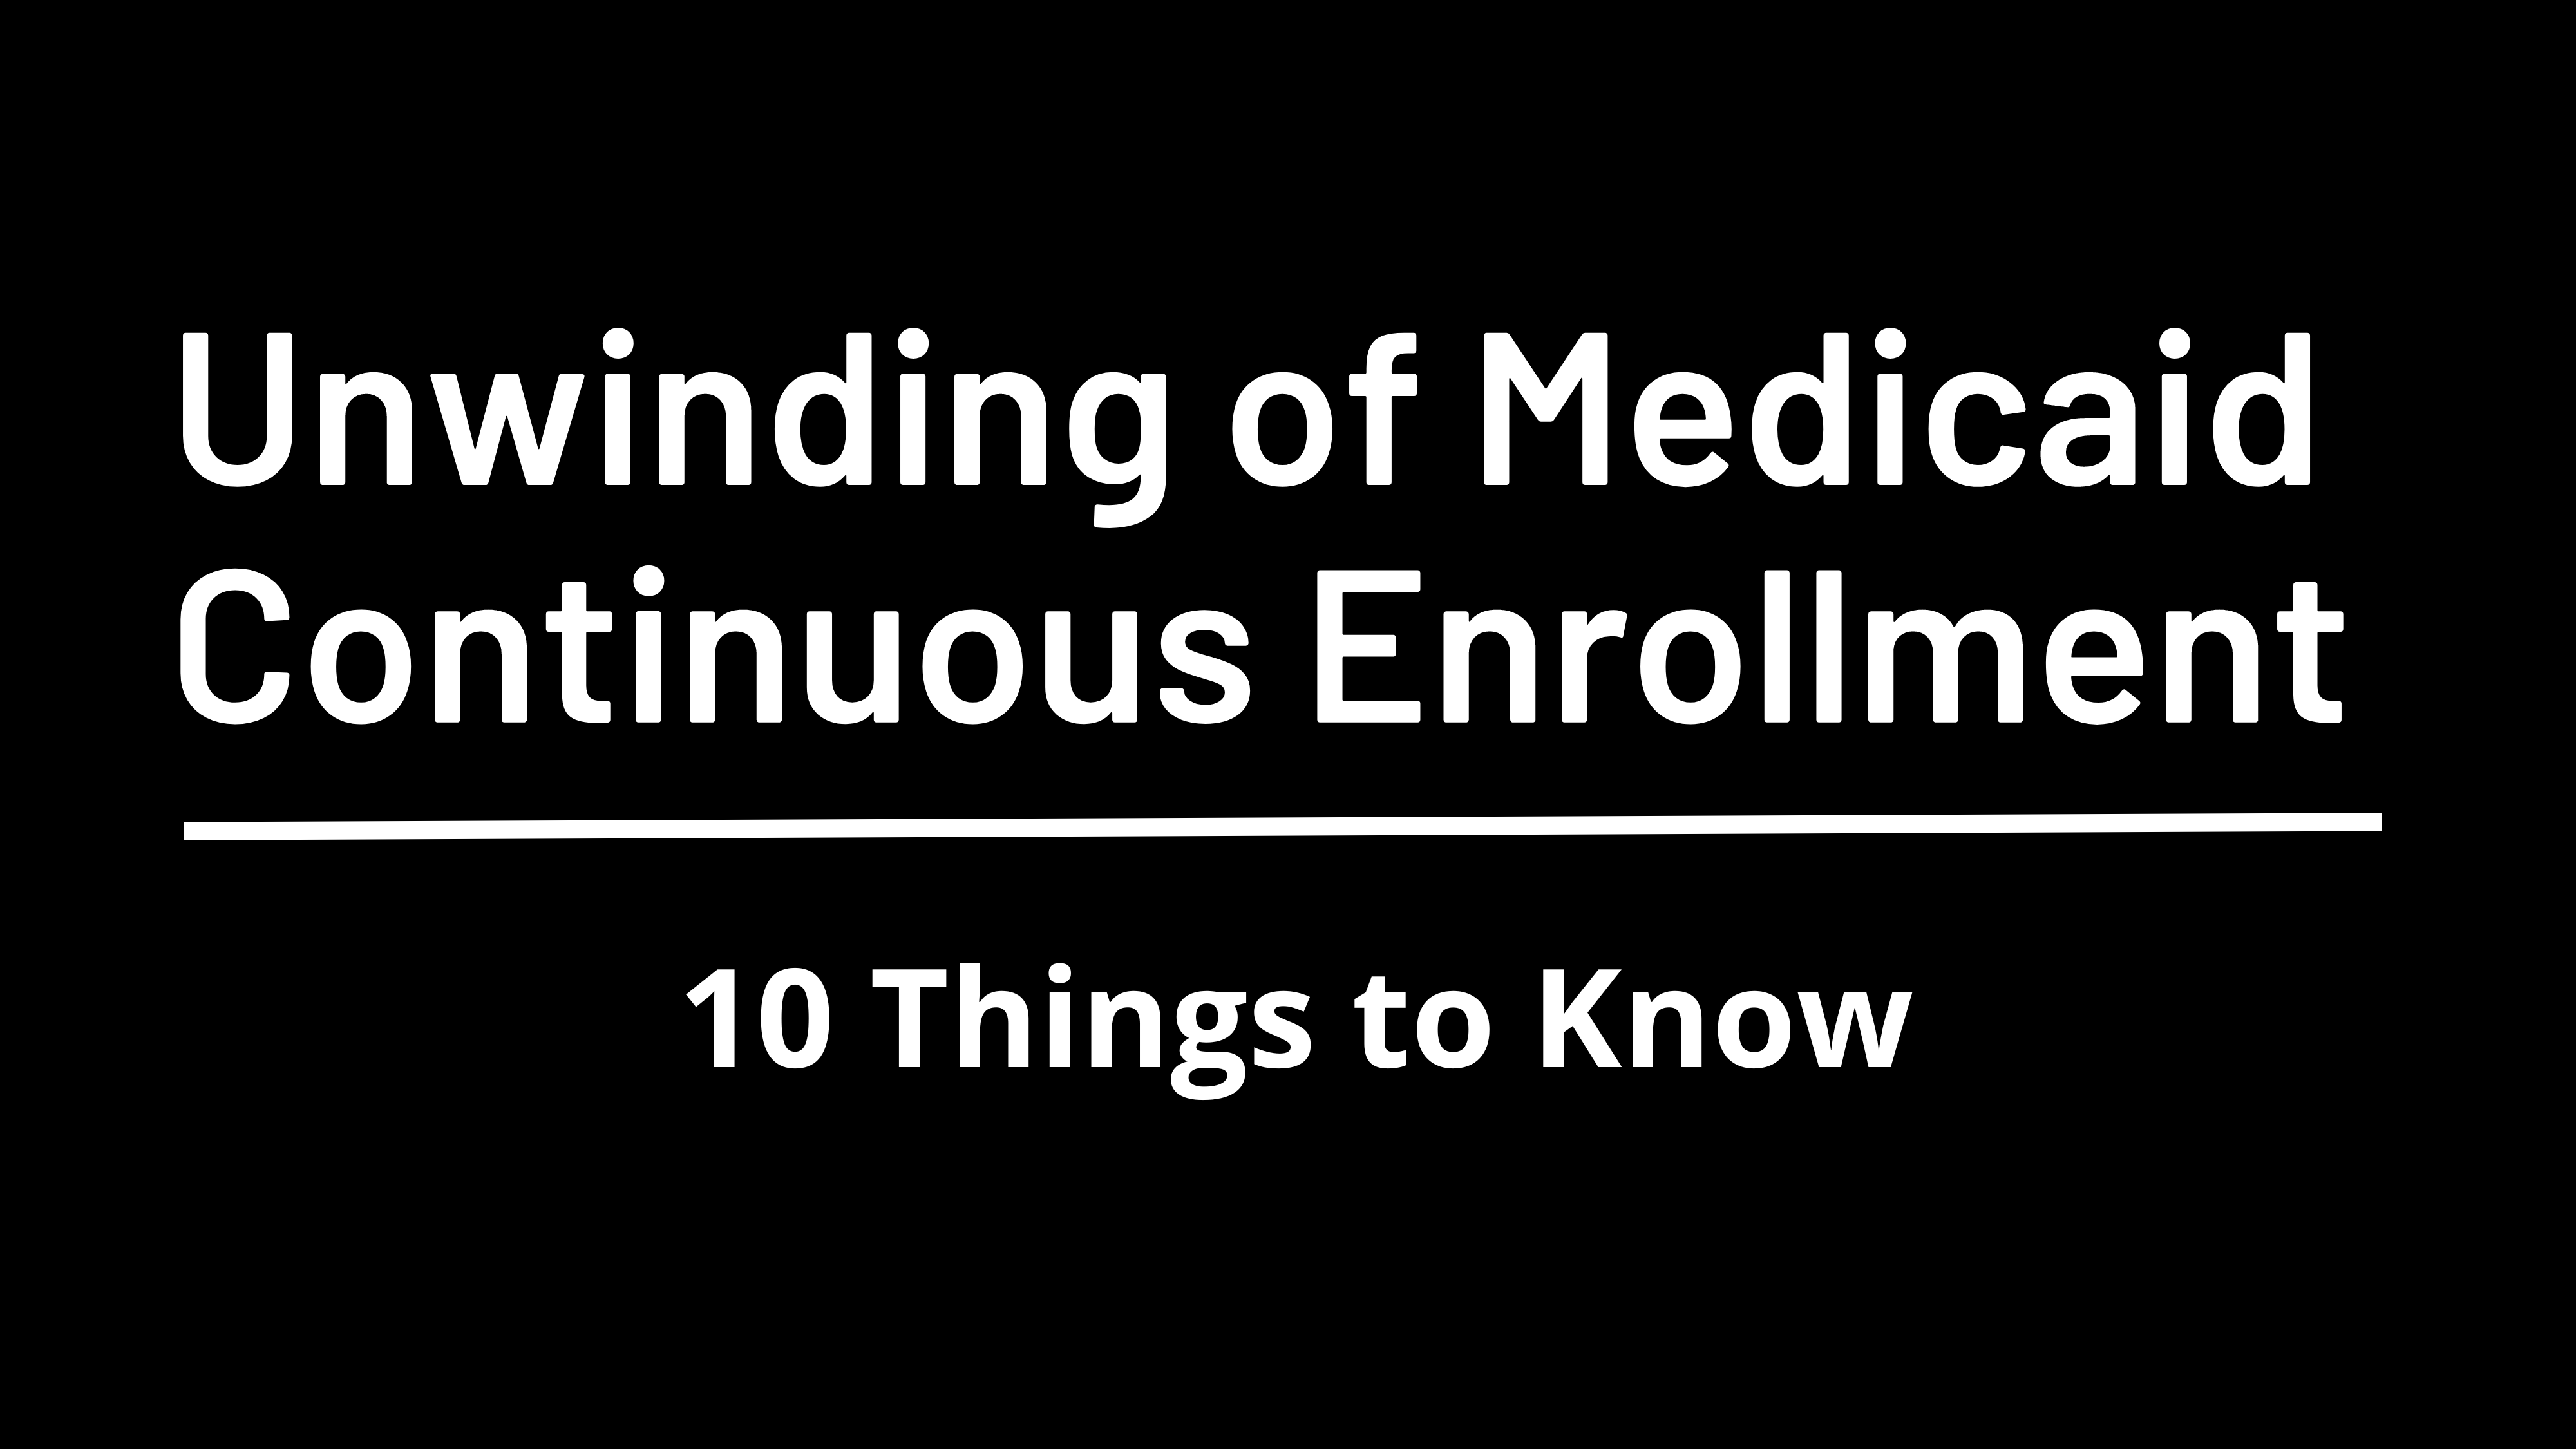 10 Things to Know About the Unwinding of the Medicaid Continuous Enrollment Provision